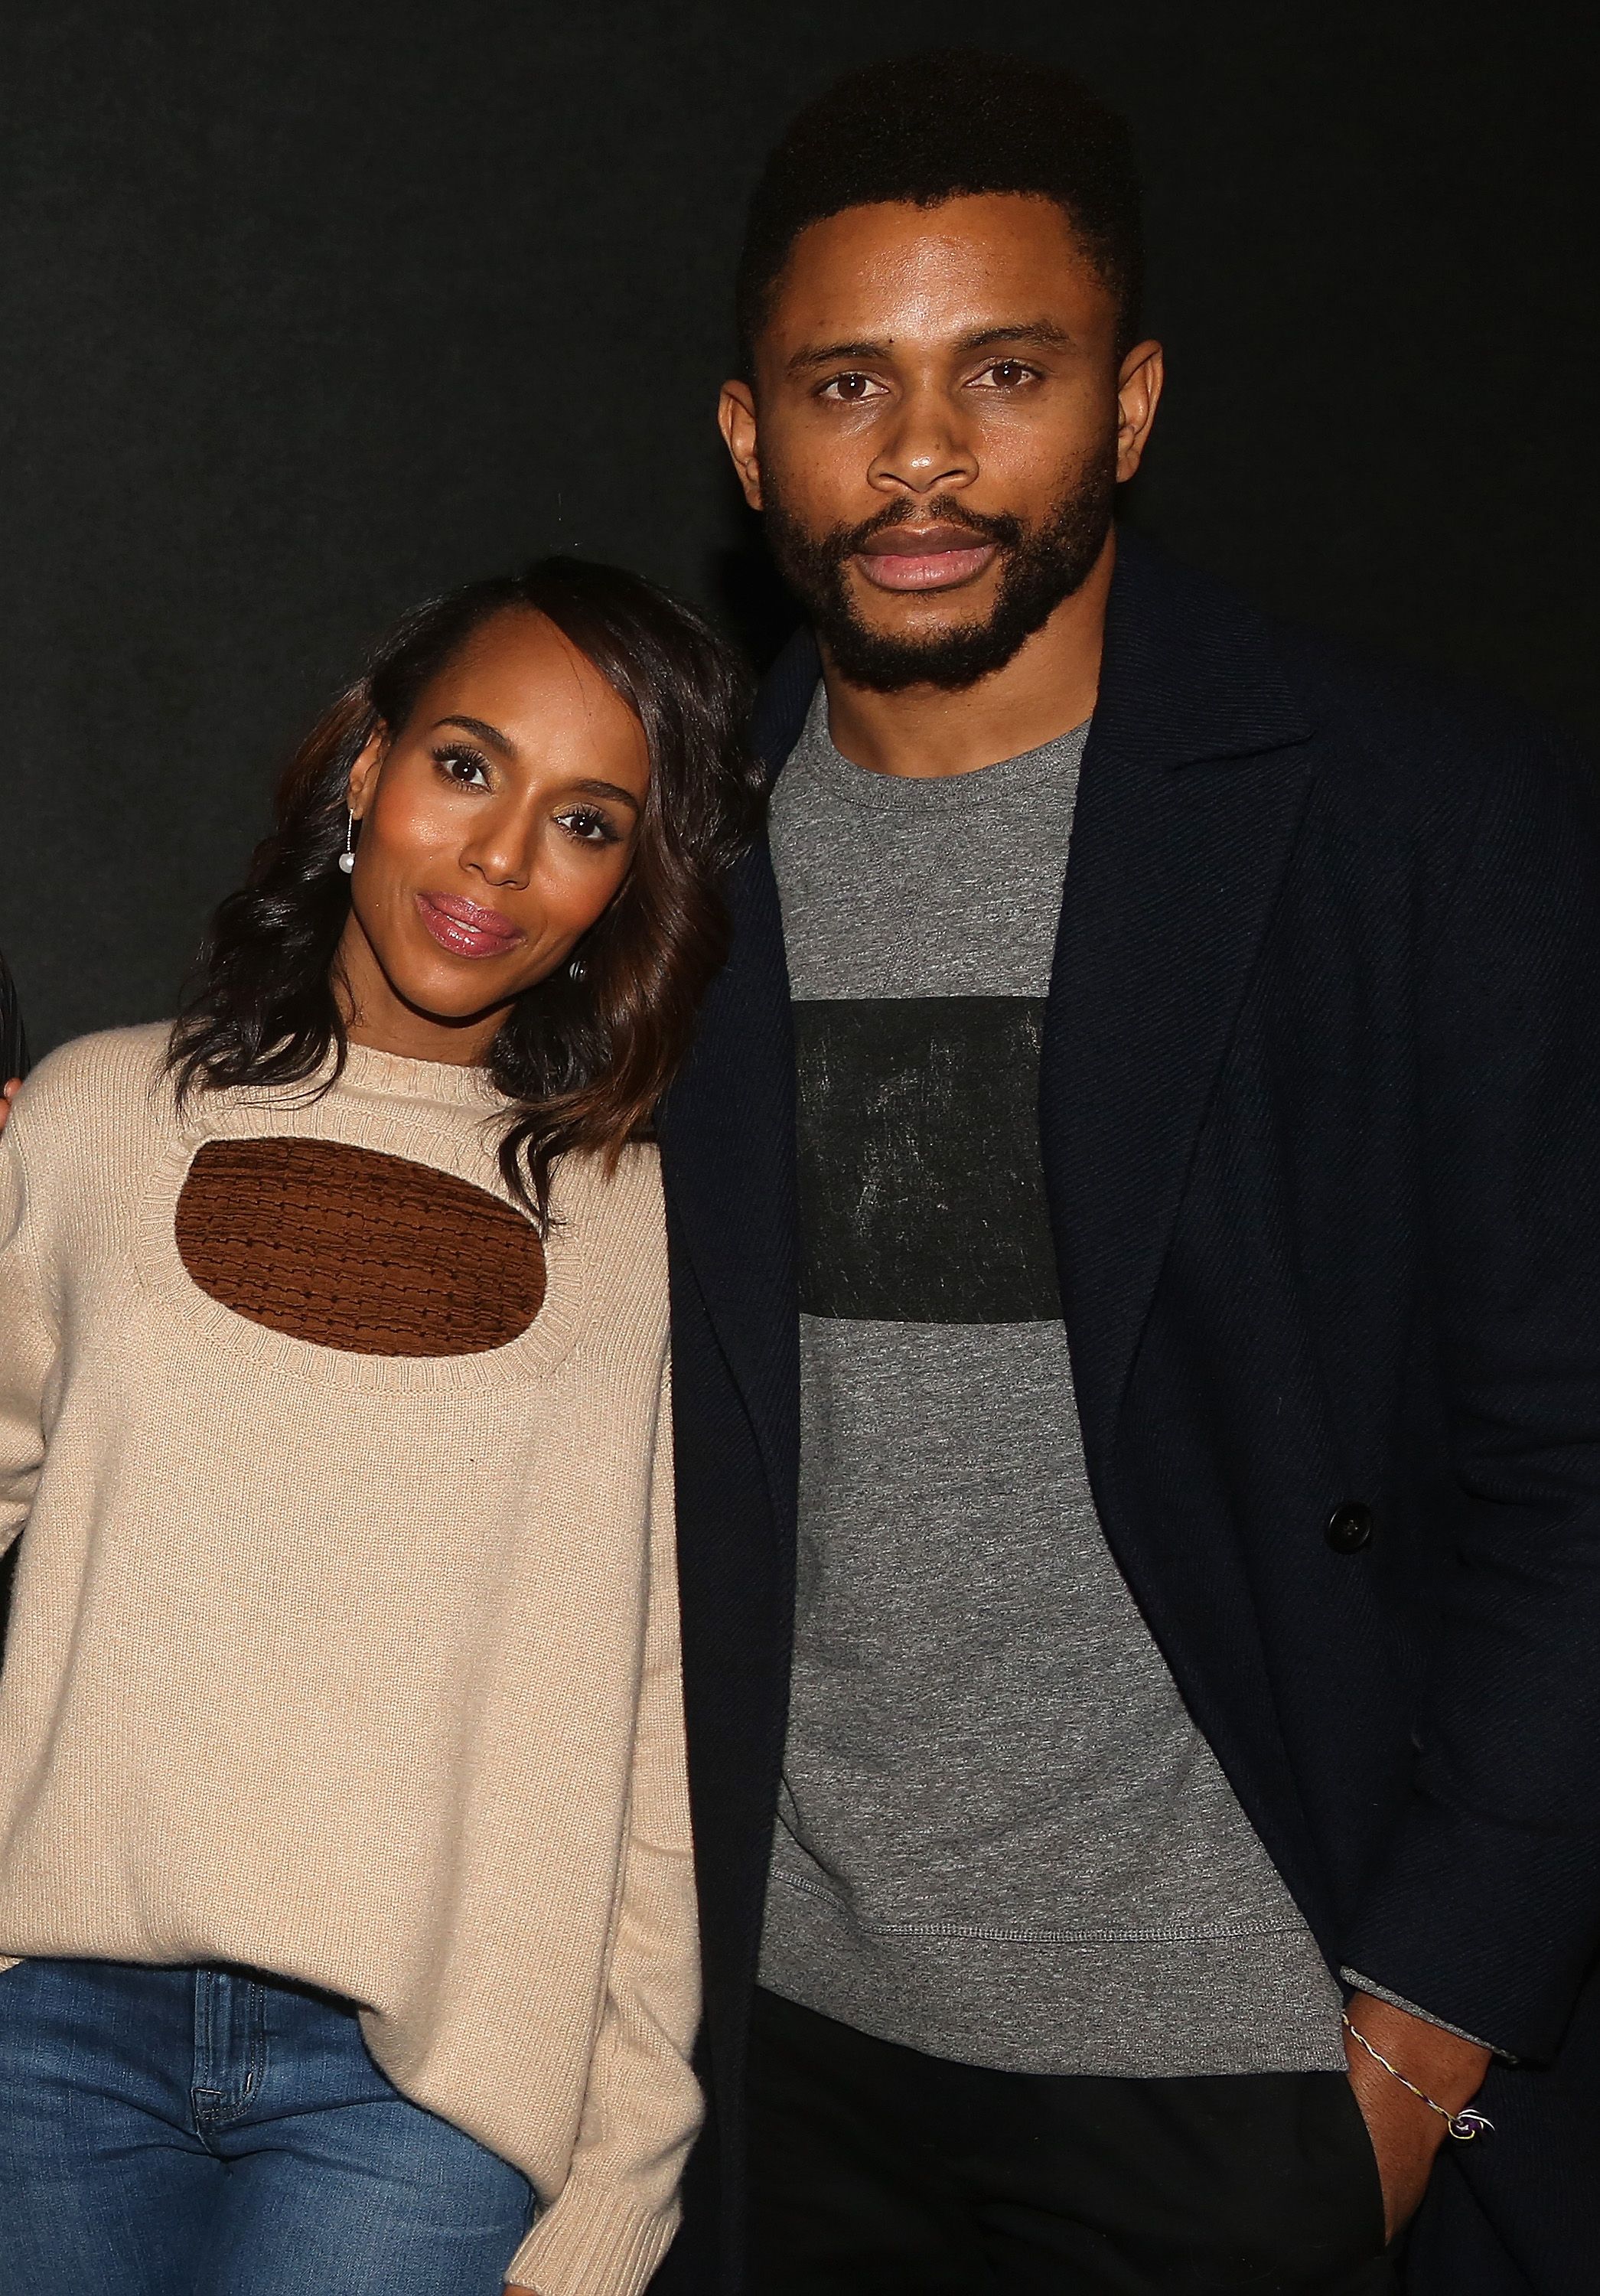 Kerry Washington and Nnamdi Asomugha at a screening of "If Beale Street Could Talk" on November 26, 2018 | Photo: Getty Images